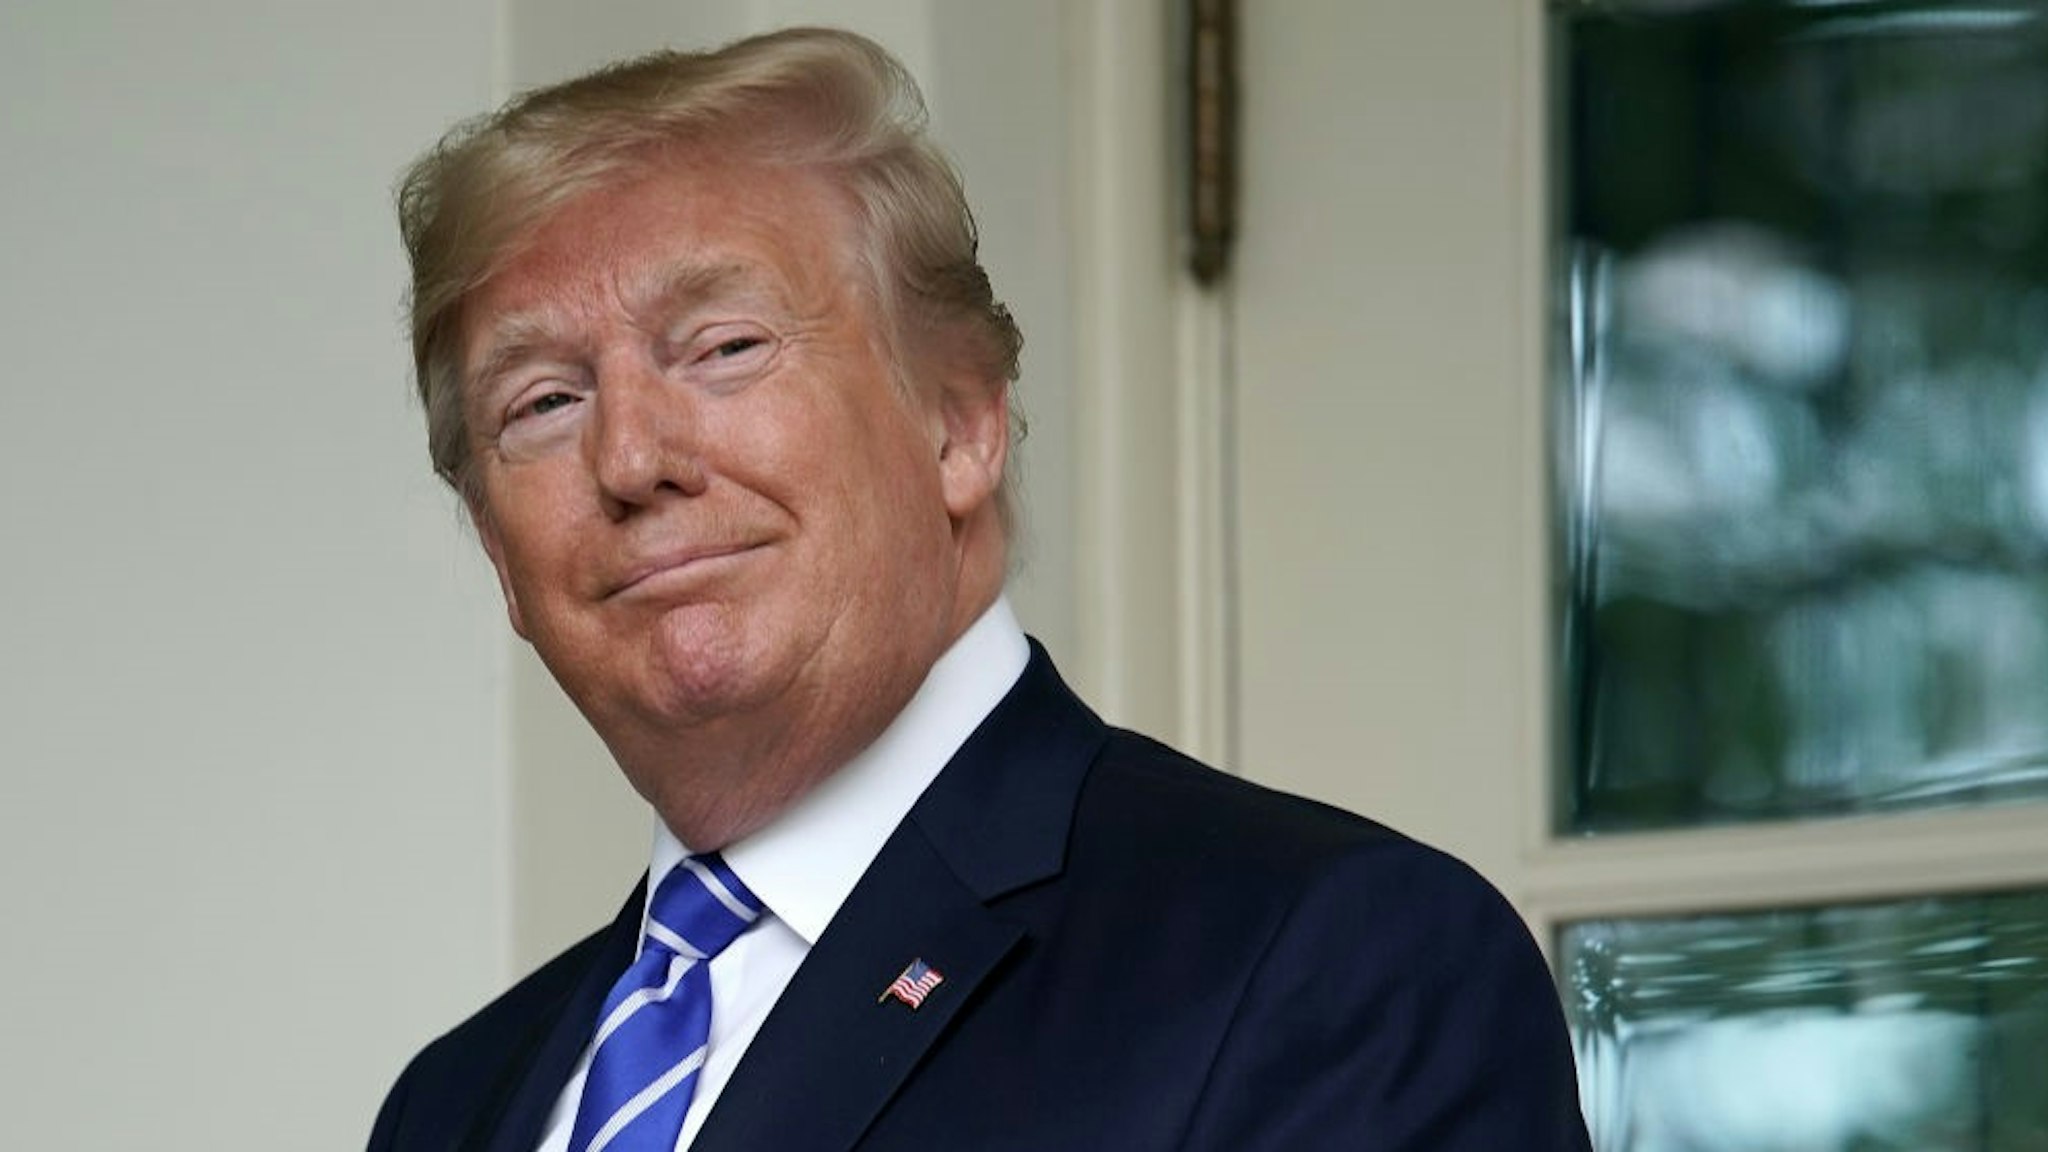 WASHINGTON, DC - JULY 31: U.S. President Donald Trump looks back at journalists after welcoming Mongolian President Battulga Khaltmaa to the White House July 31, 2019 in Washington, DC. Khaltmaa, who traveled to the White House to seek trade and military deals with the United States, also symbolically gifted a horse to Trump's son, Barron. Trump said the horse will be named "Victory." (Photo by